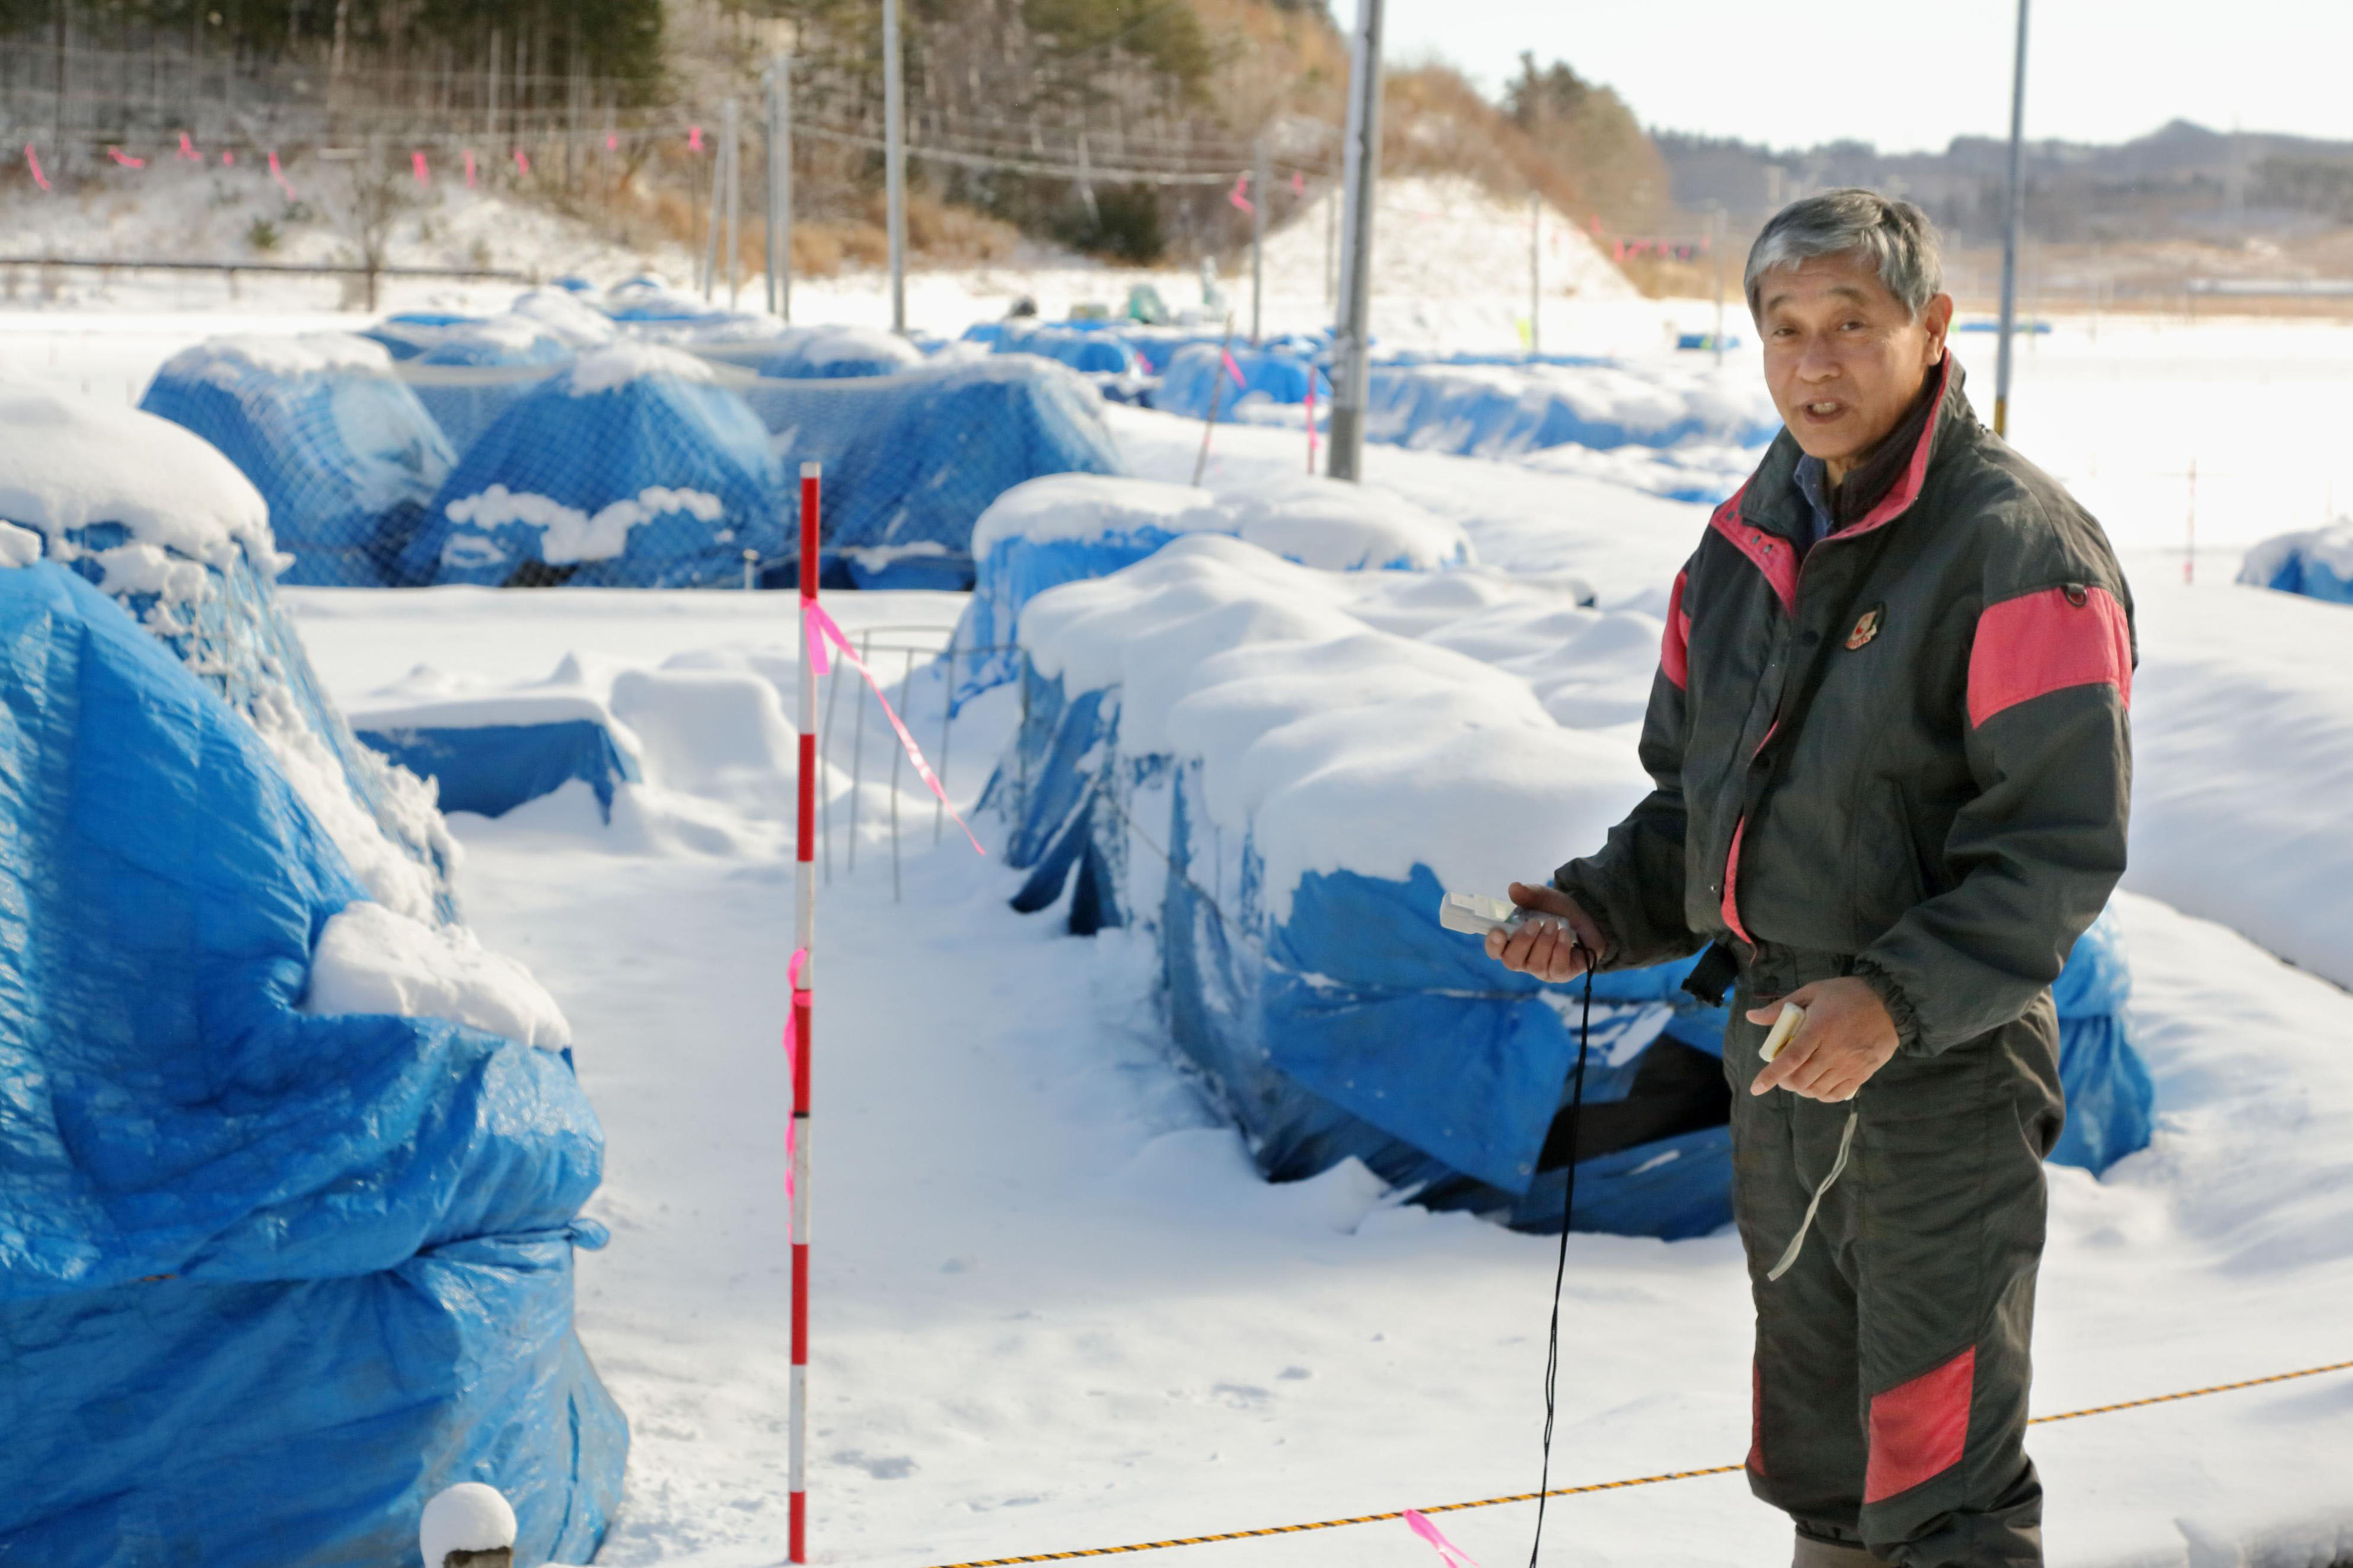 Victim of circumstance: Nobuyoshi Ito, who describes himself as an 'apprentice farmer,' holds a dosimeter in front of snow-covered bags containing contaminated dirt and sand in the village of Iitate, Fukushima Prefecture, on Dec. 15. | KYODO